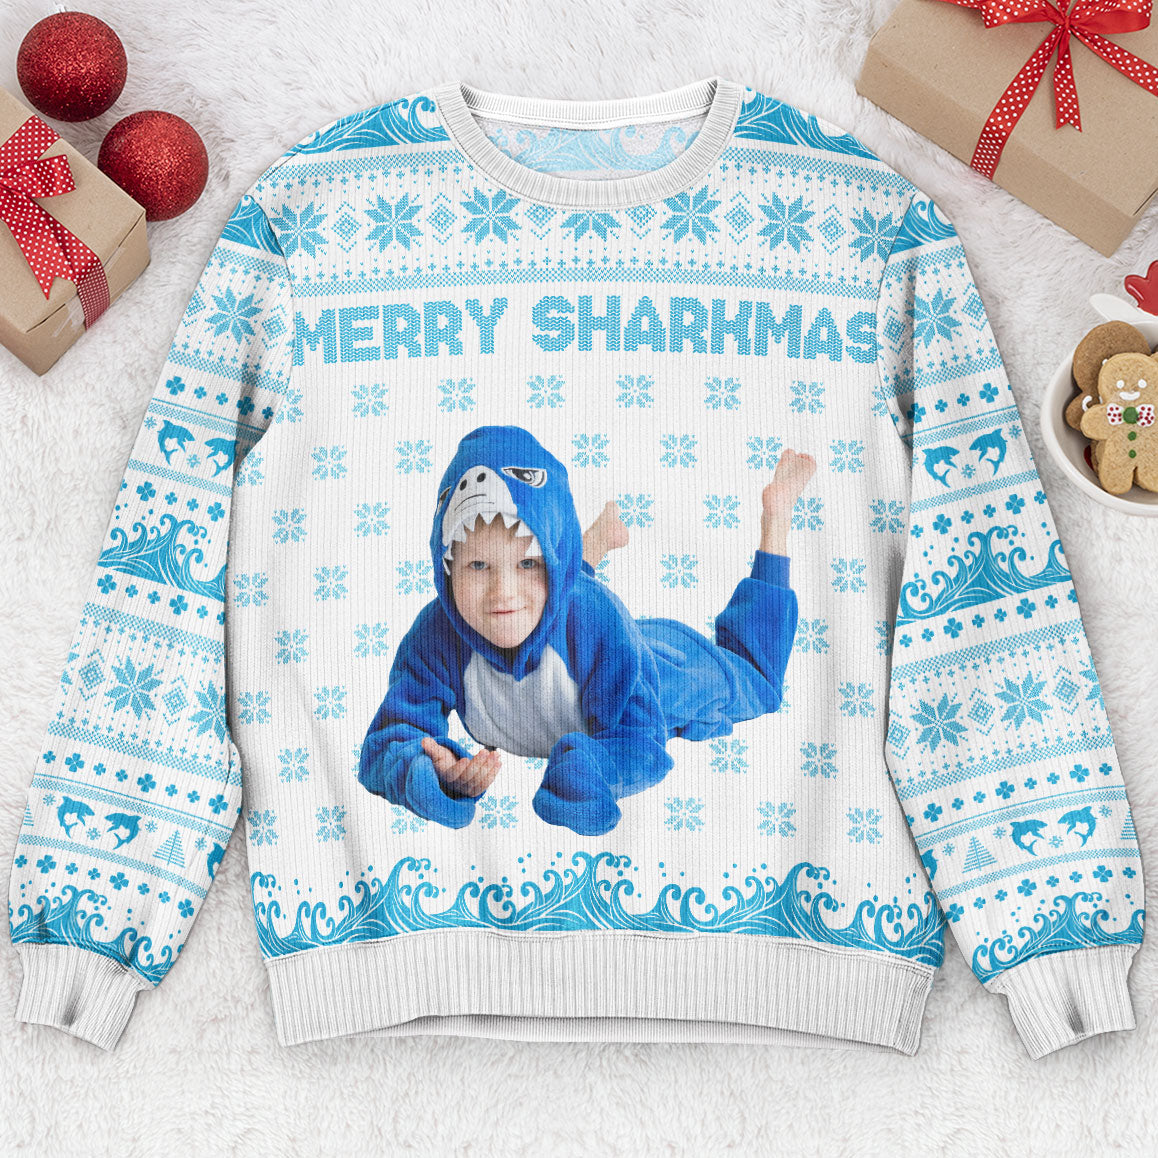 Merry Sharkmas - Personalized Photo Ugly Sweater